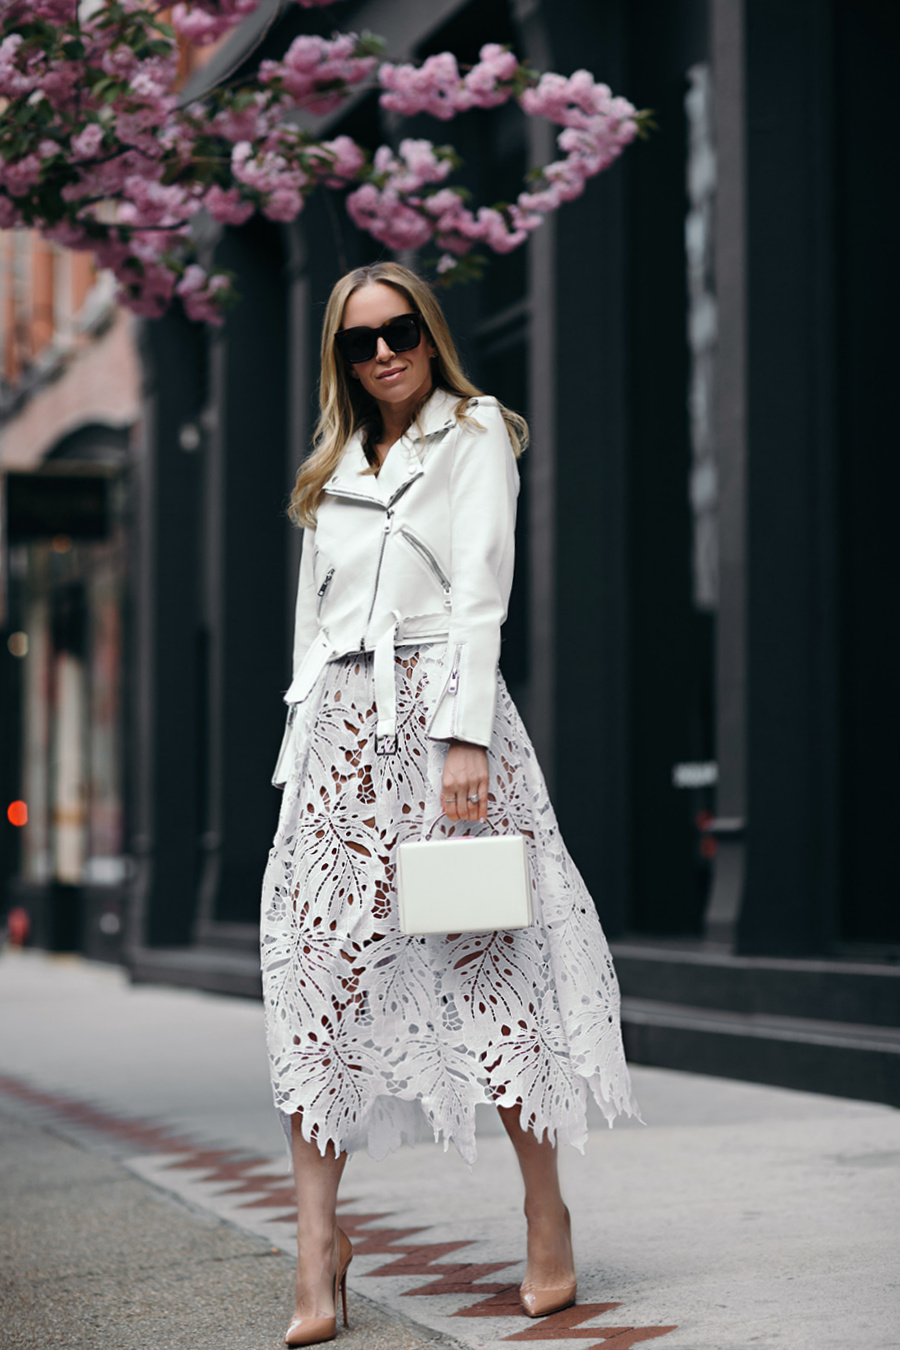 Spring Dresses | Spring Style: White Out | Brooklyn Blonde